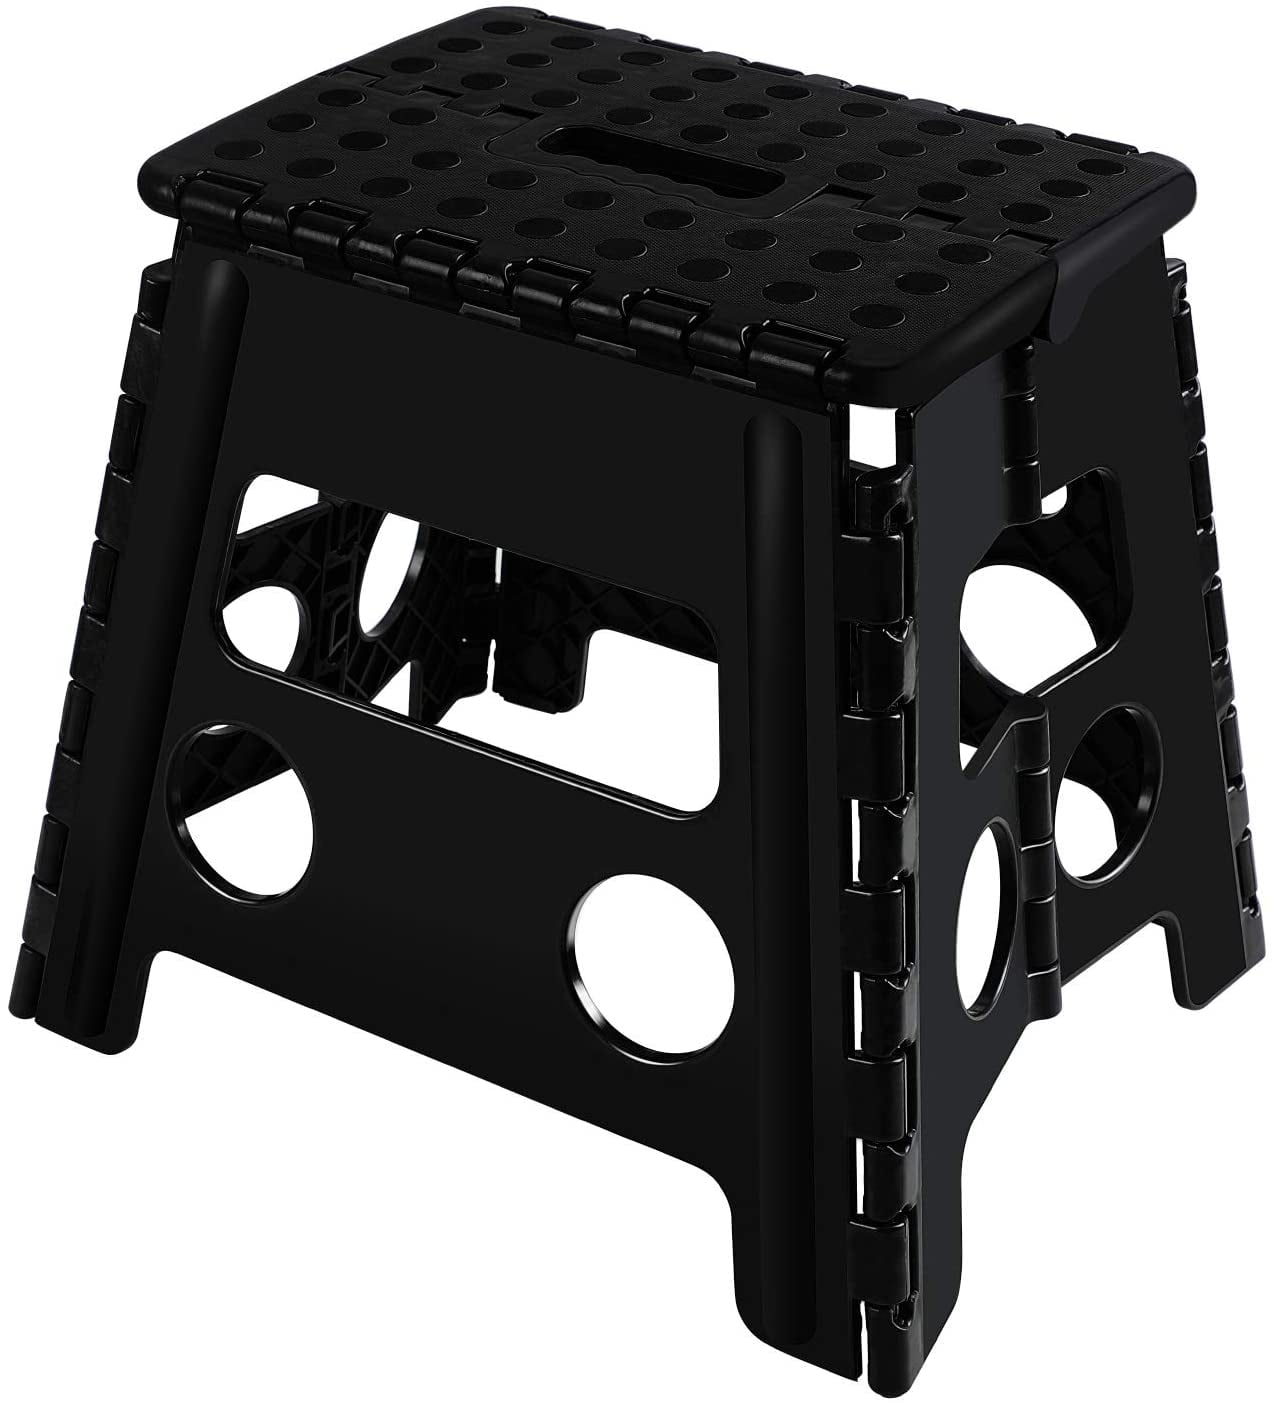 Non-Stretching Plastic Step Stool For Home Office Use Cream